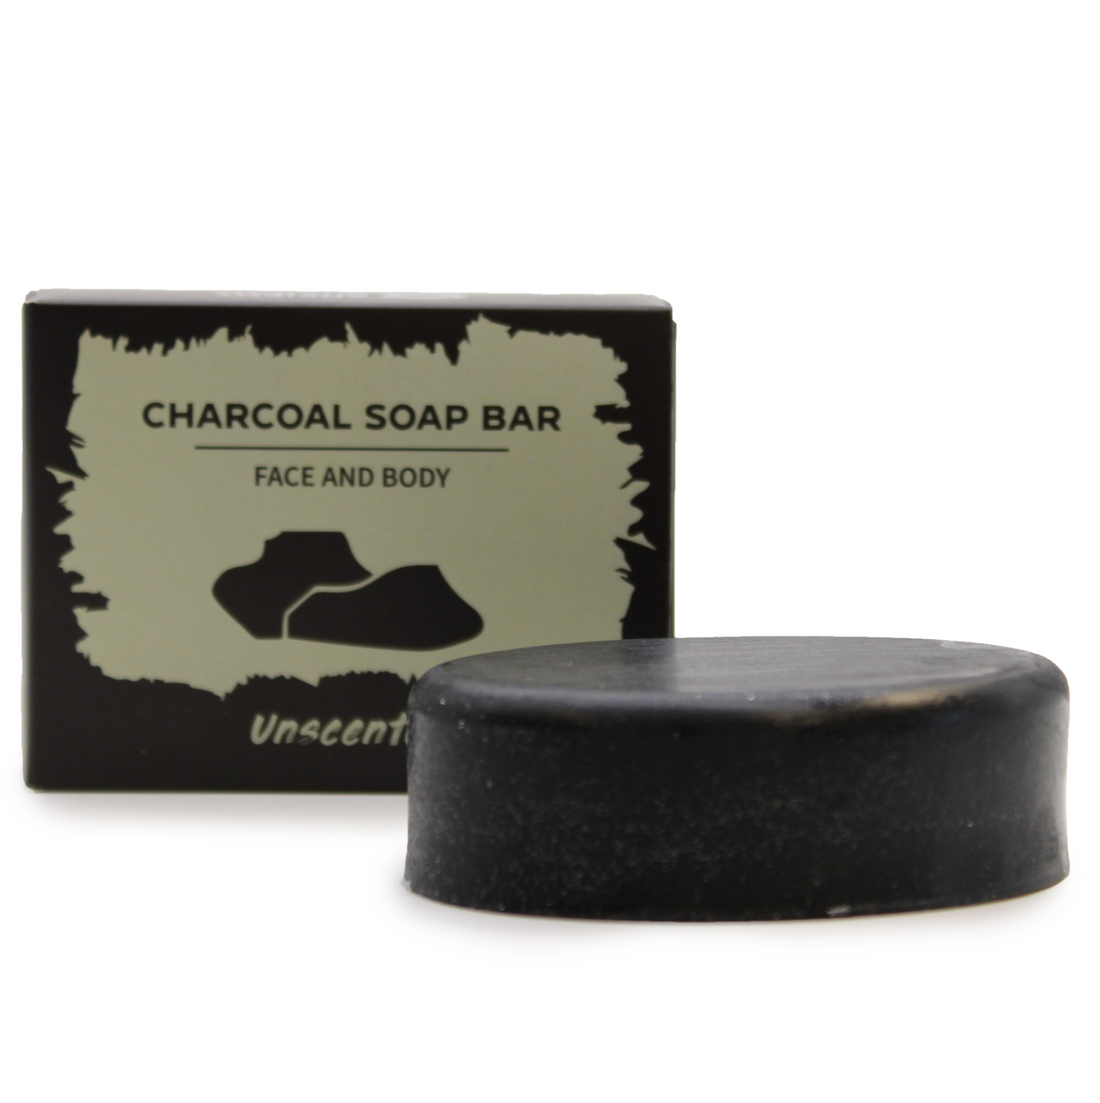 UnScented Charcoal Soap